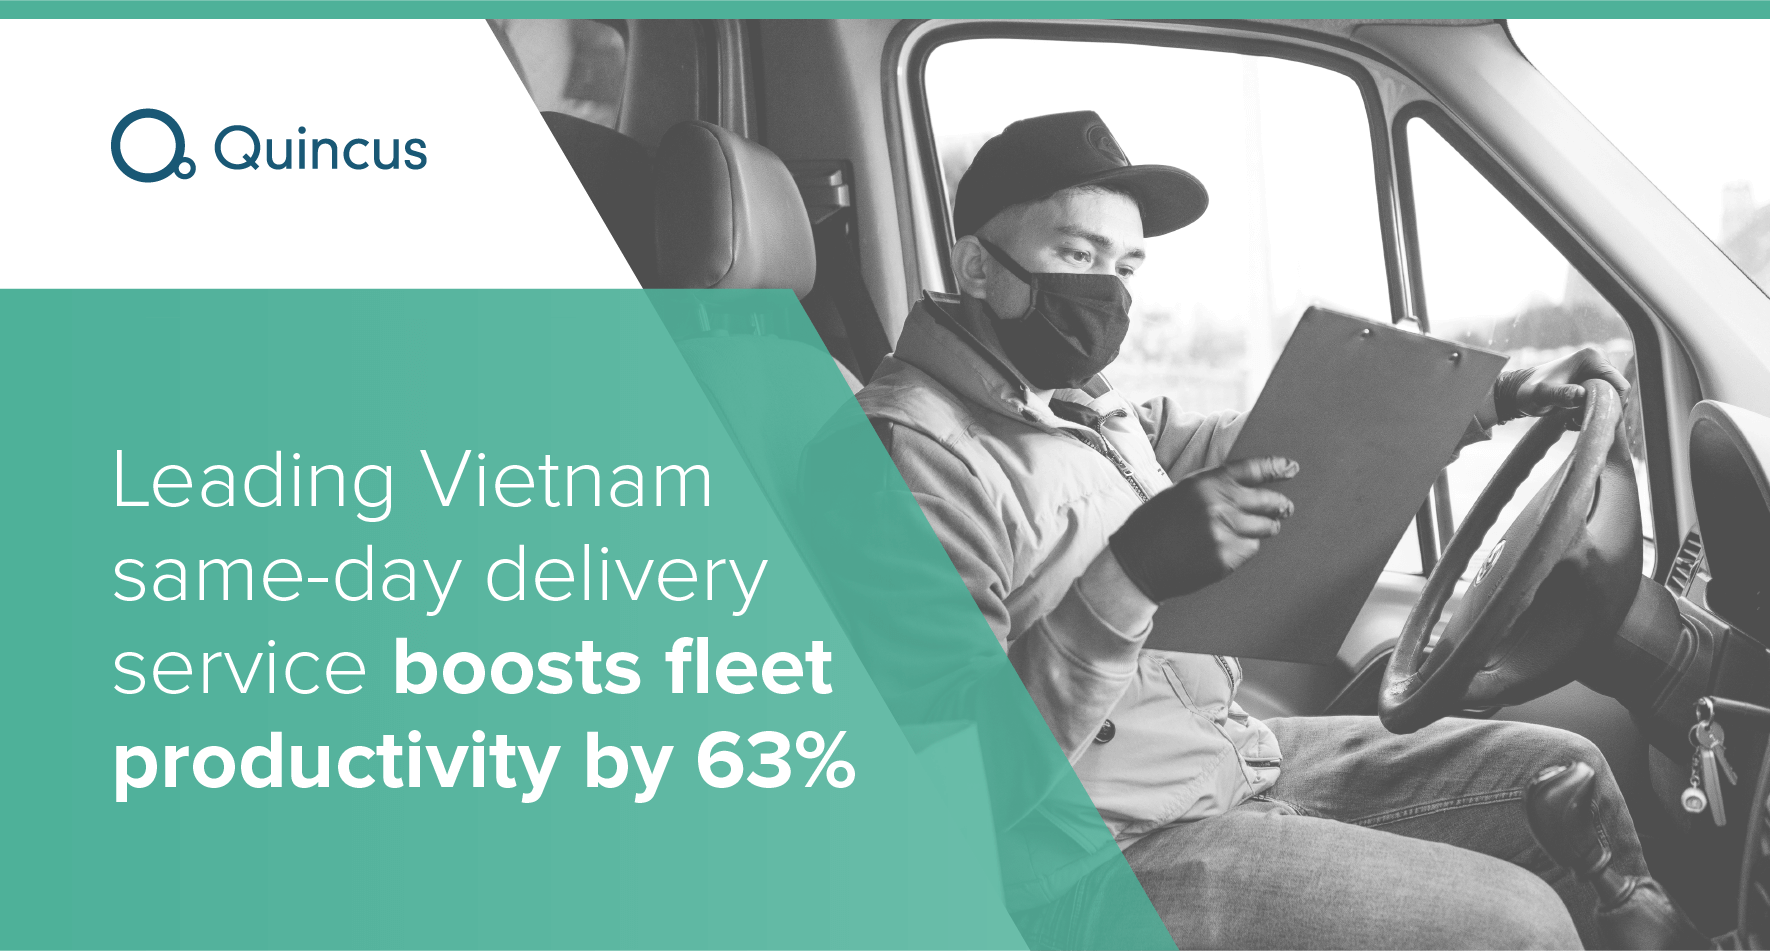 Leading Vietnam same-day delivery service boosts fleet productivity by 63%